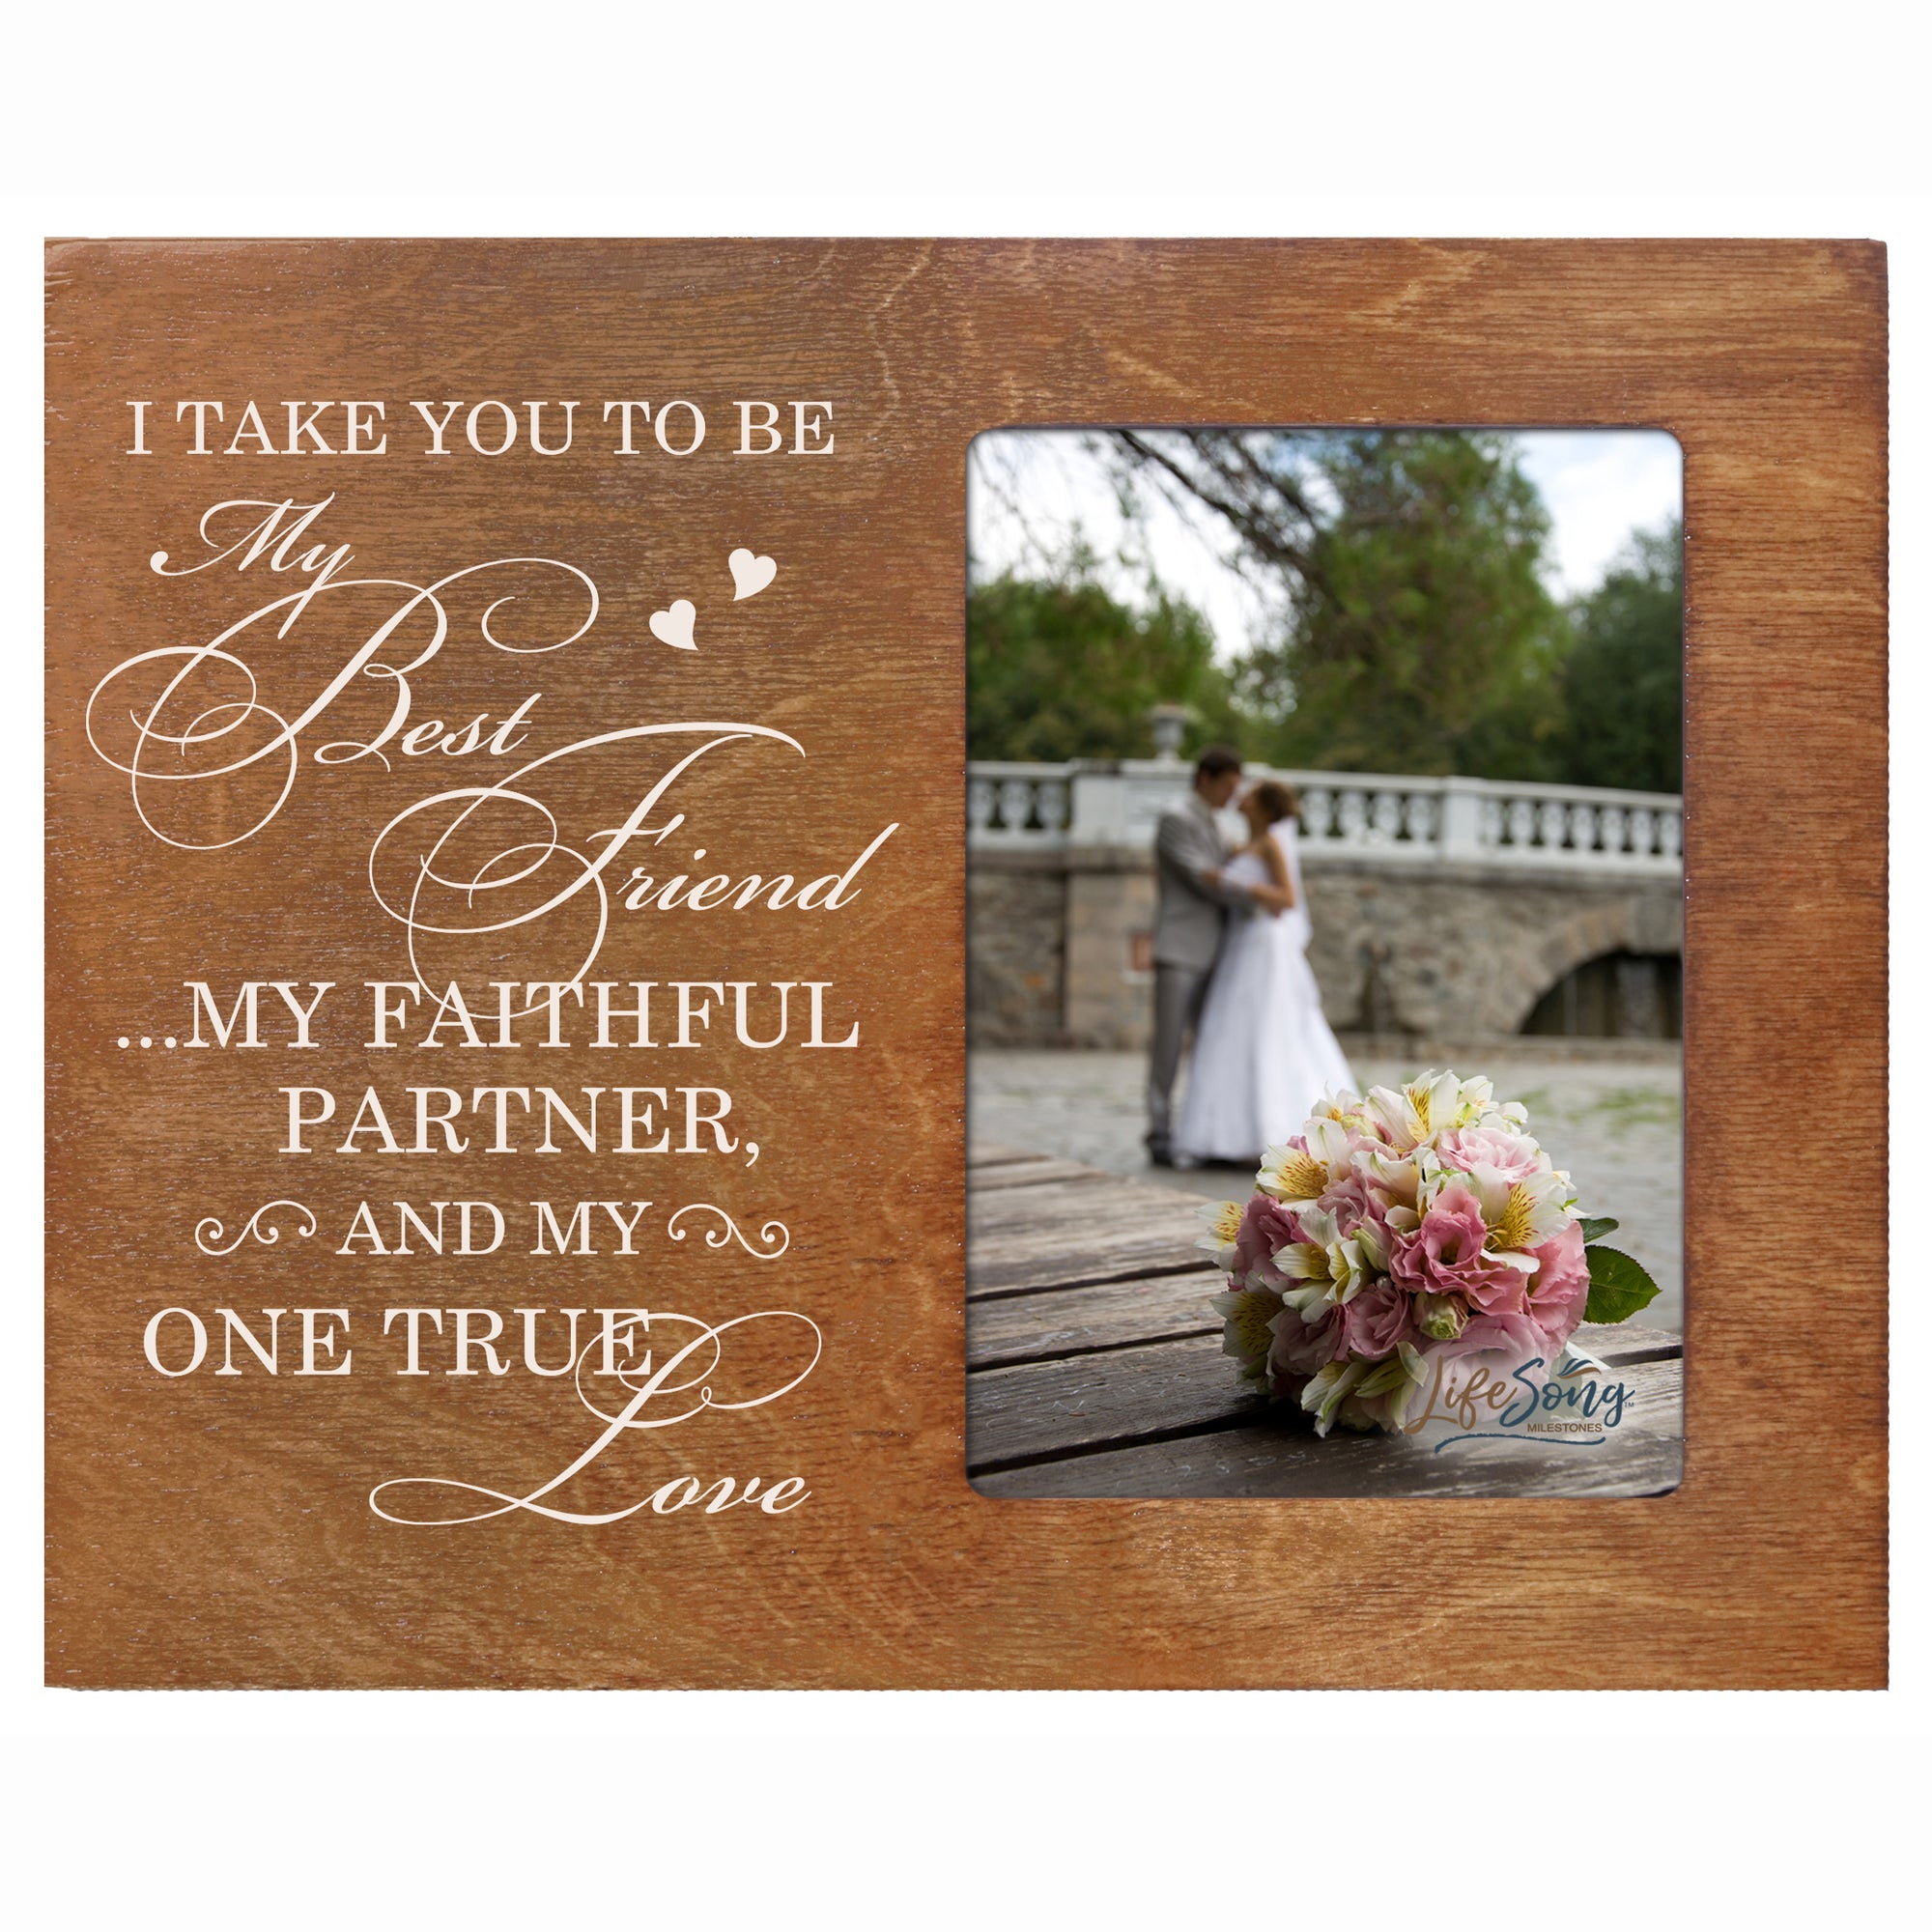 LifeSong Milestones Wedding Vow Wedding Anniversary Wooden 8"x 10" Picture Frame Engagement Gift for Couple, Best Friends, Newly Married Mr and Mrs. 4 x 6 Photo